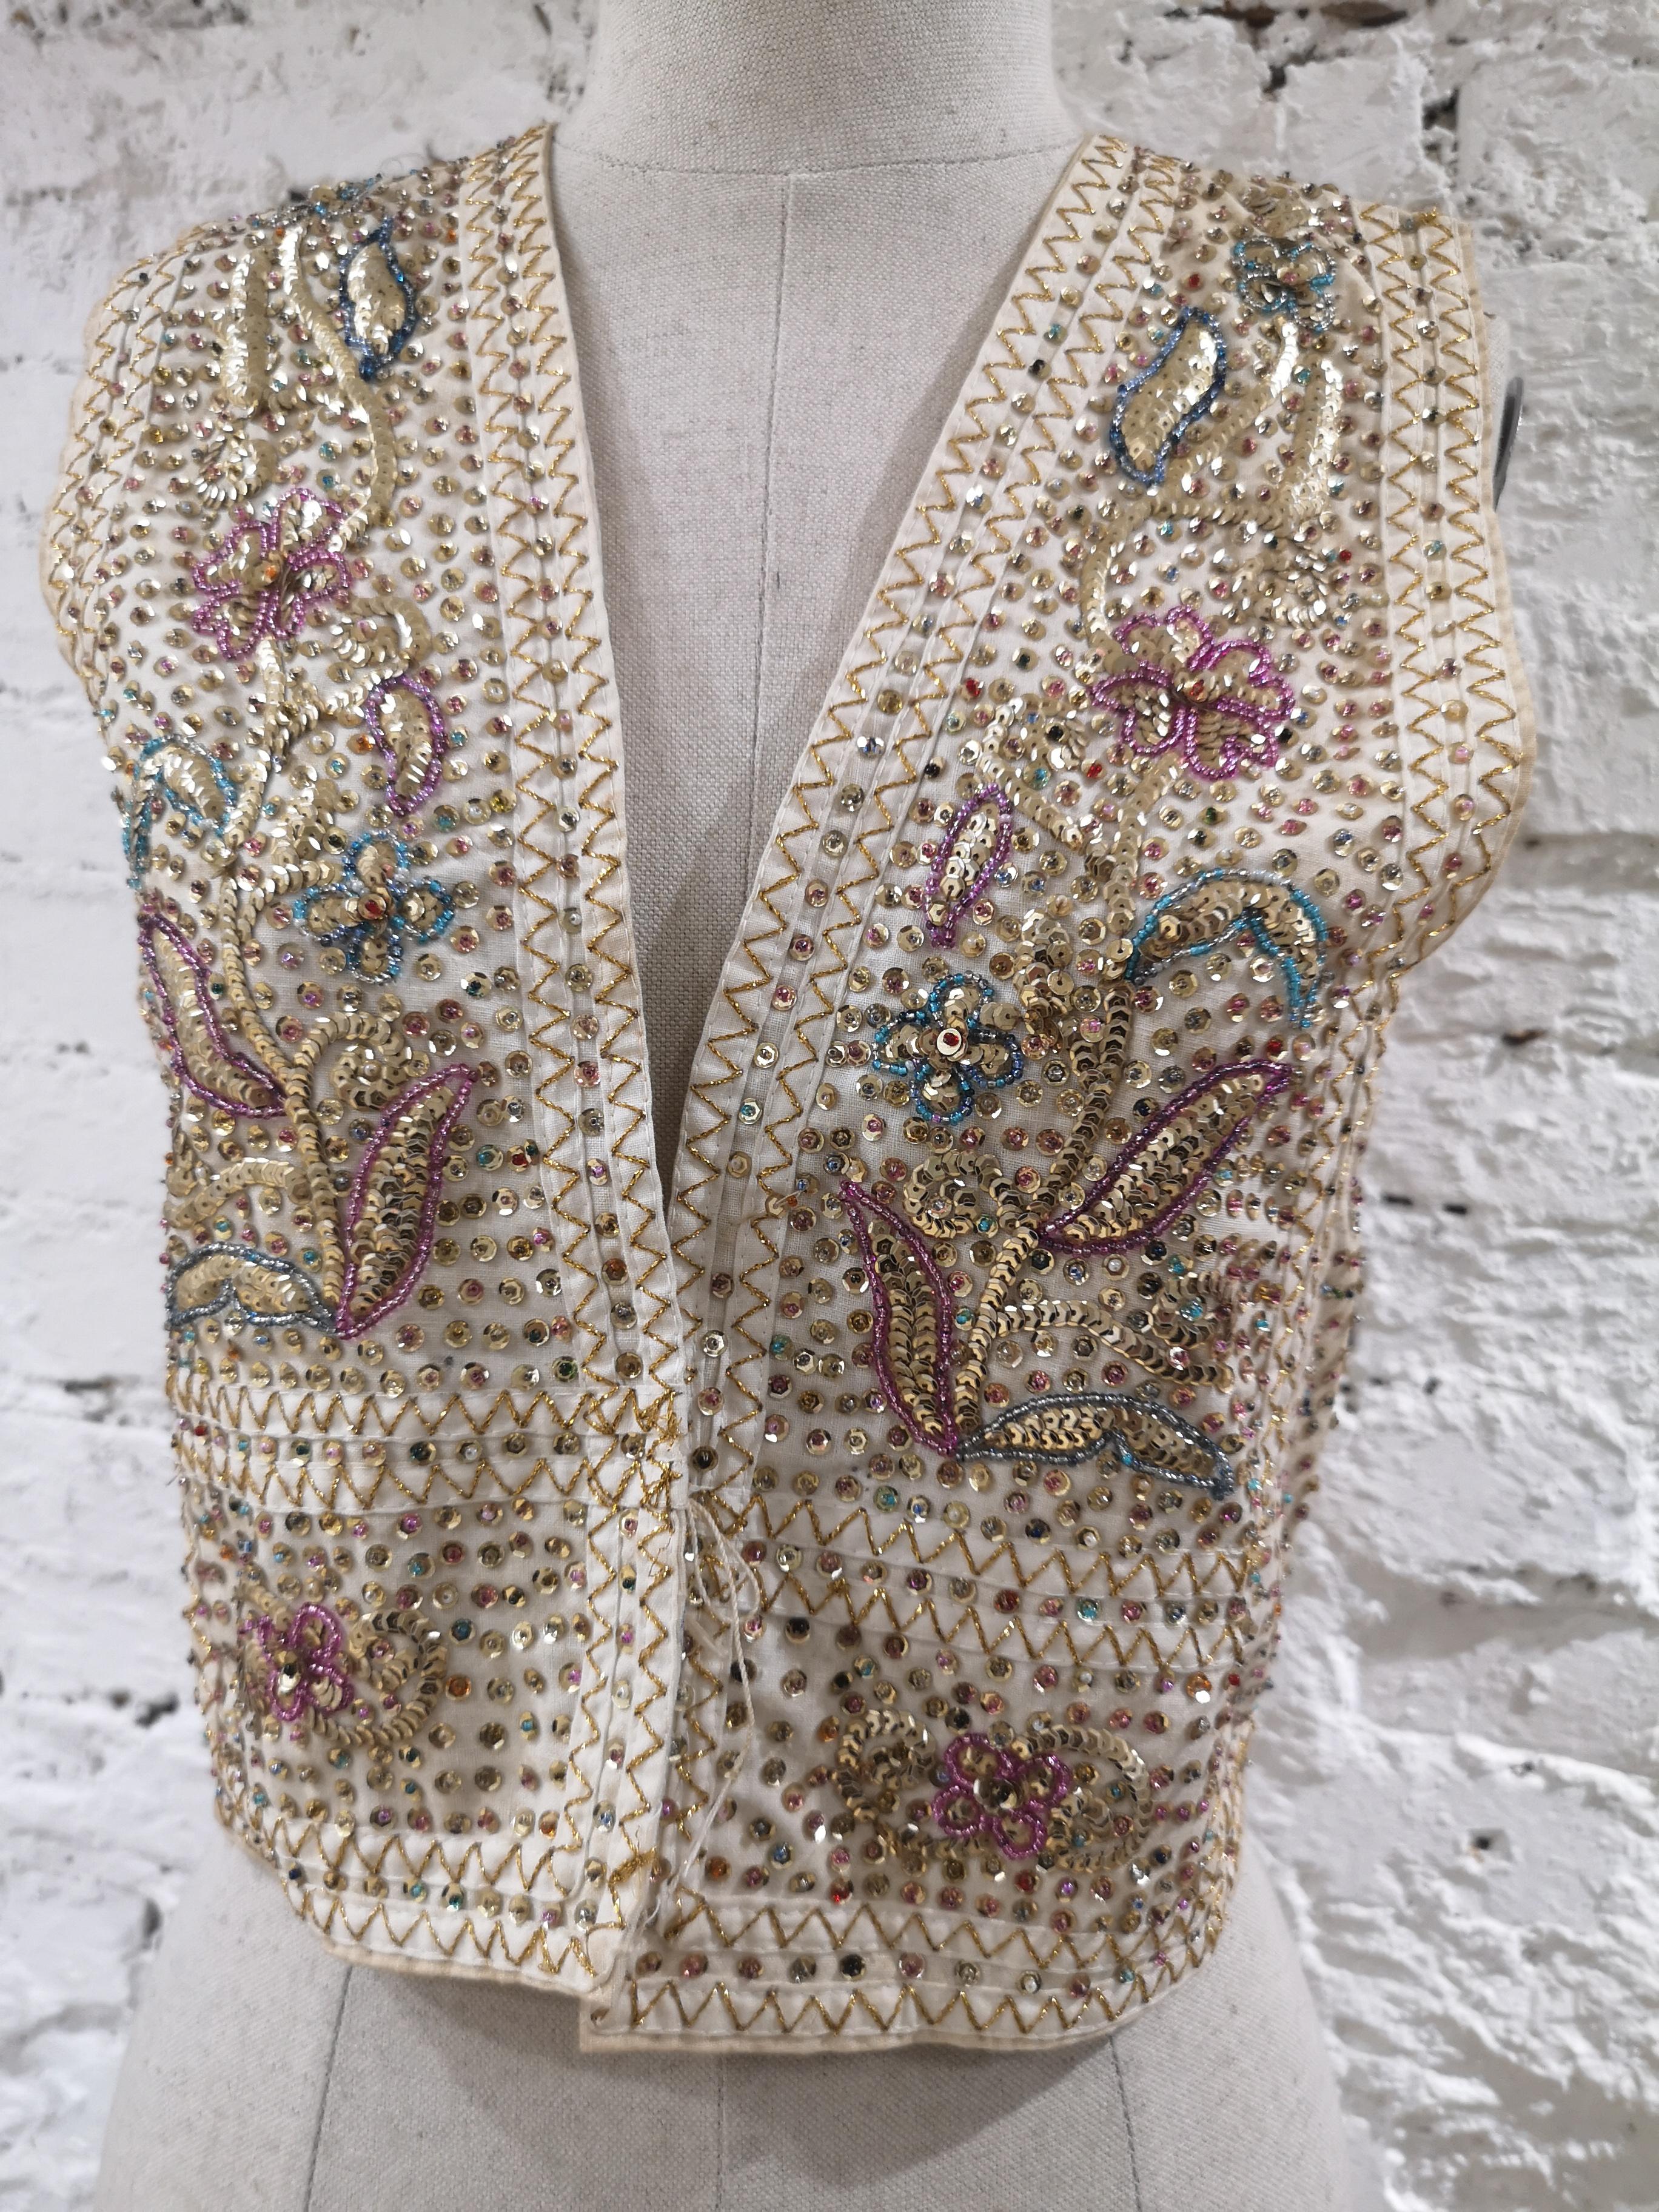 SOAB handmade beige sequins and beads vest
size M 